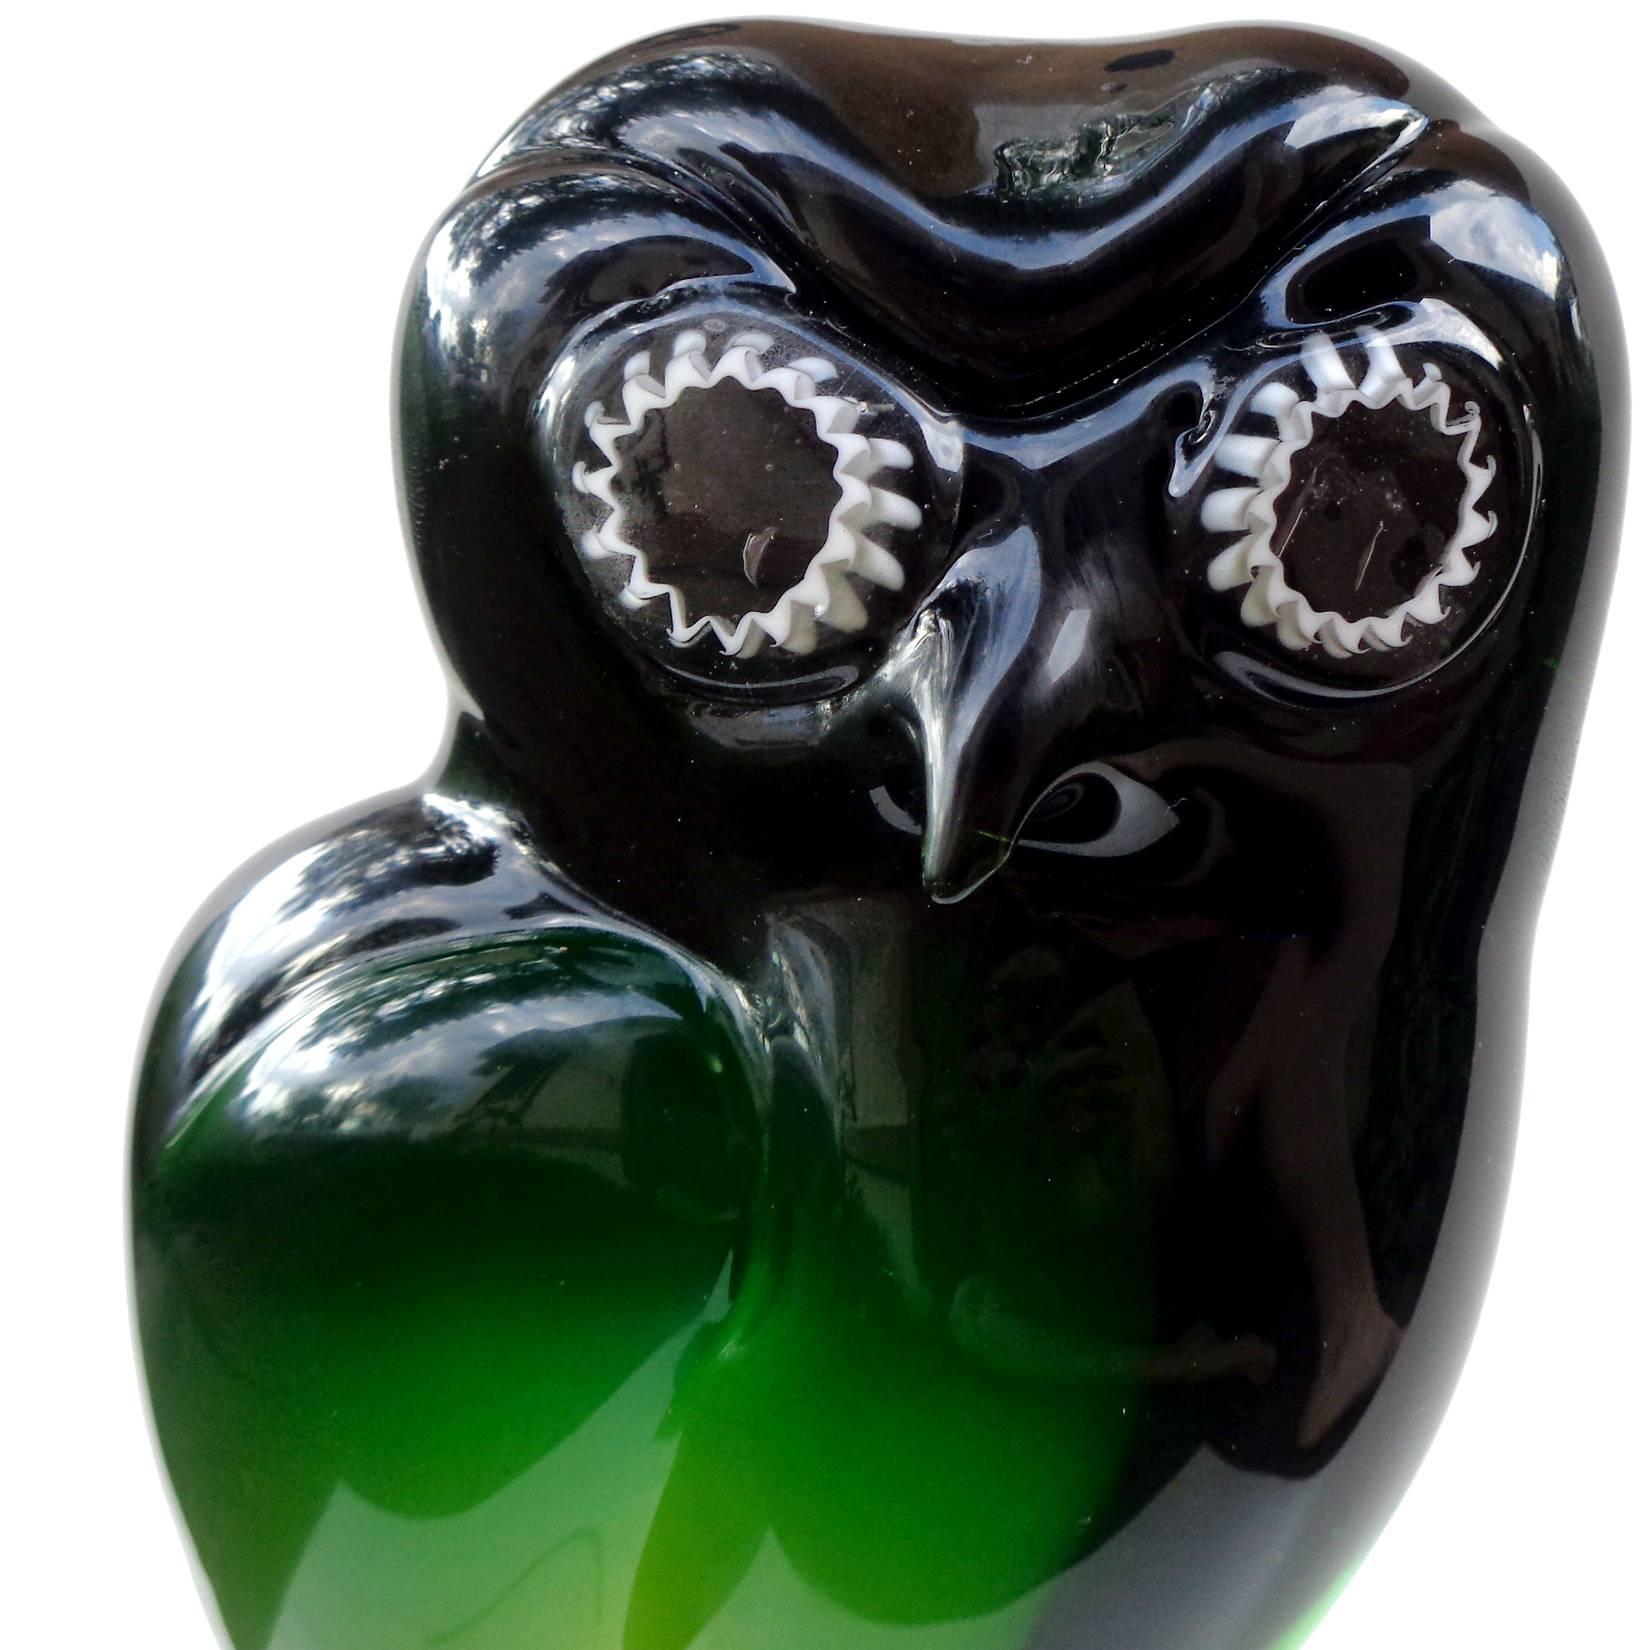 Free shipping worldwide! See details below description.

Beautiful Murano handblown Sommerso light to dark green art glass owl sculpture. Documented to the Salviati Company. It has white murrines for the eyes and stands on clear glass